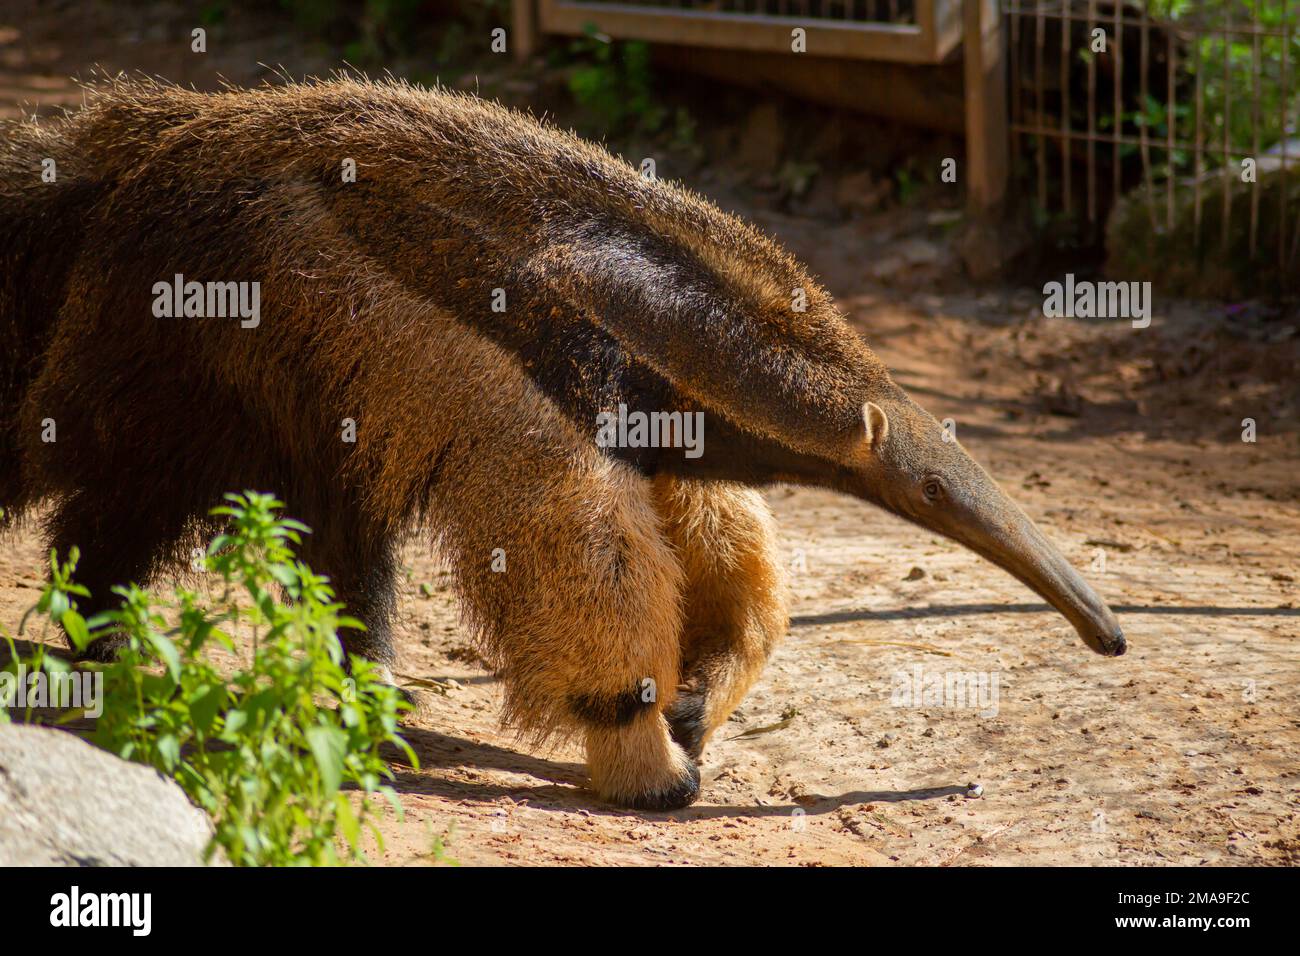 The anteater walks through its enclosure at the zoo. Stock Photo